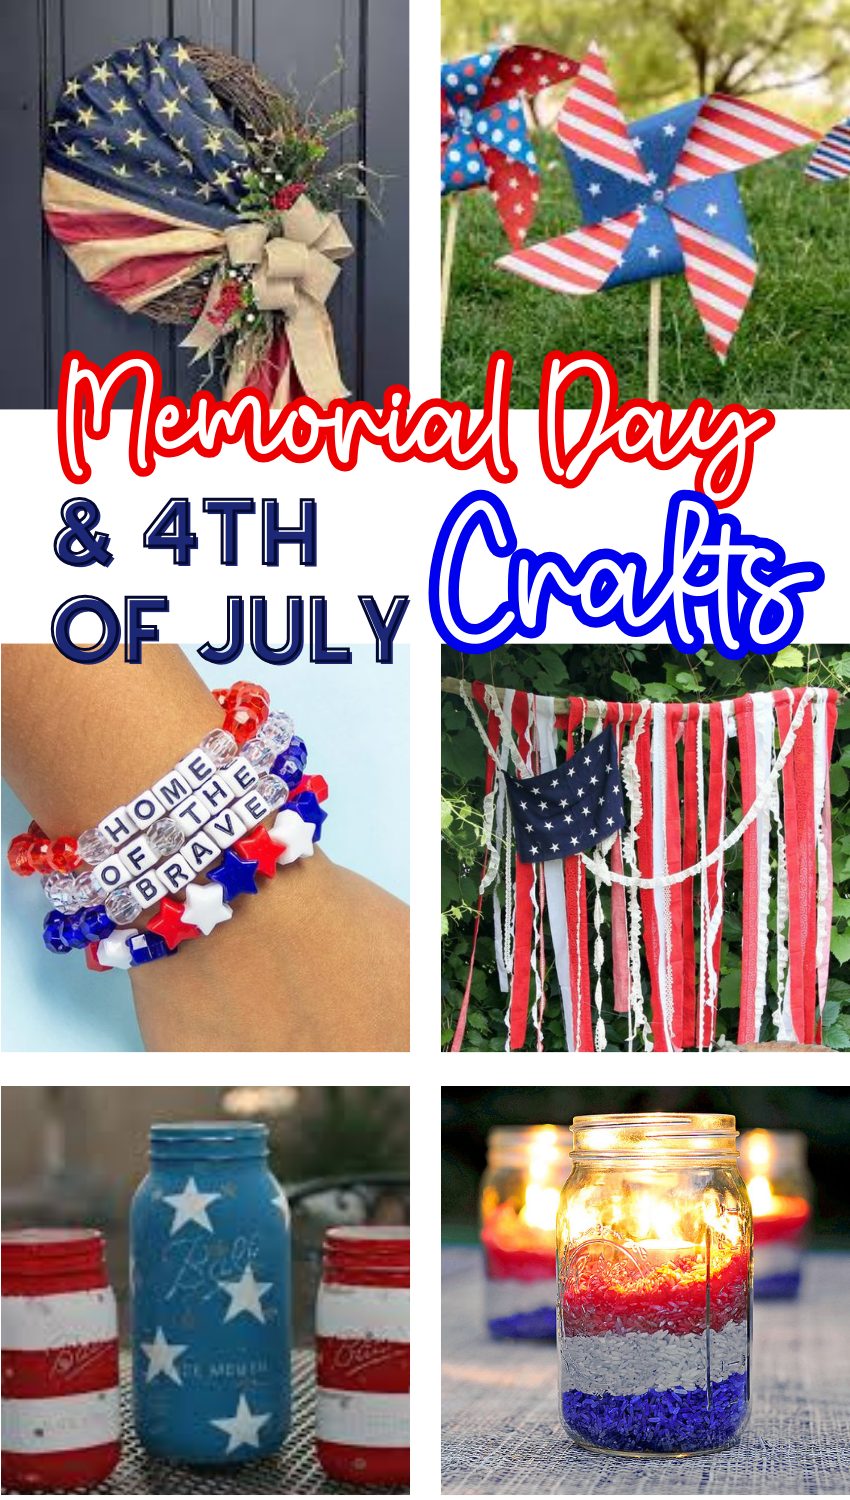 Memorial Day and 4th of July Crafts